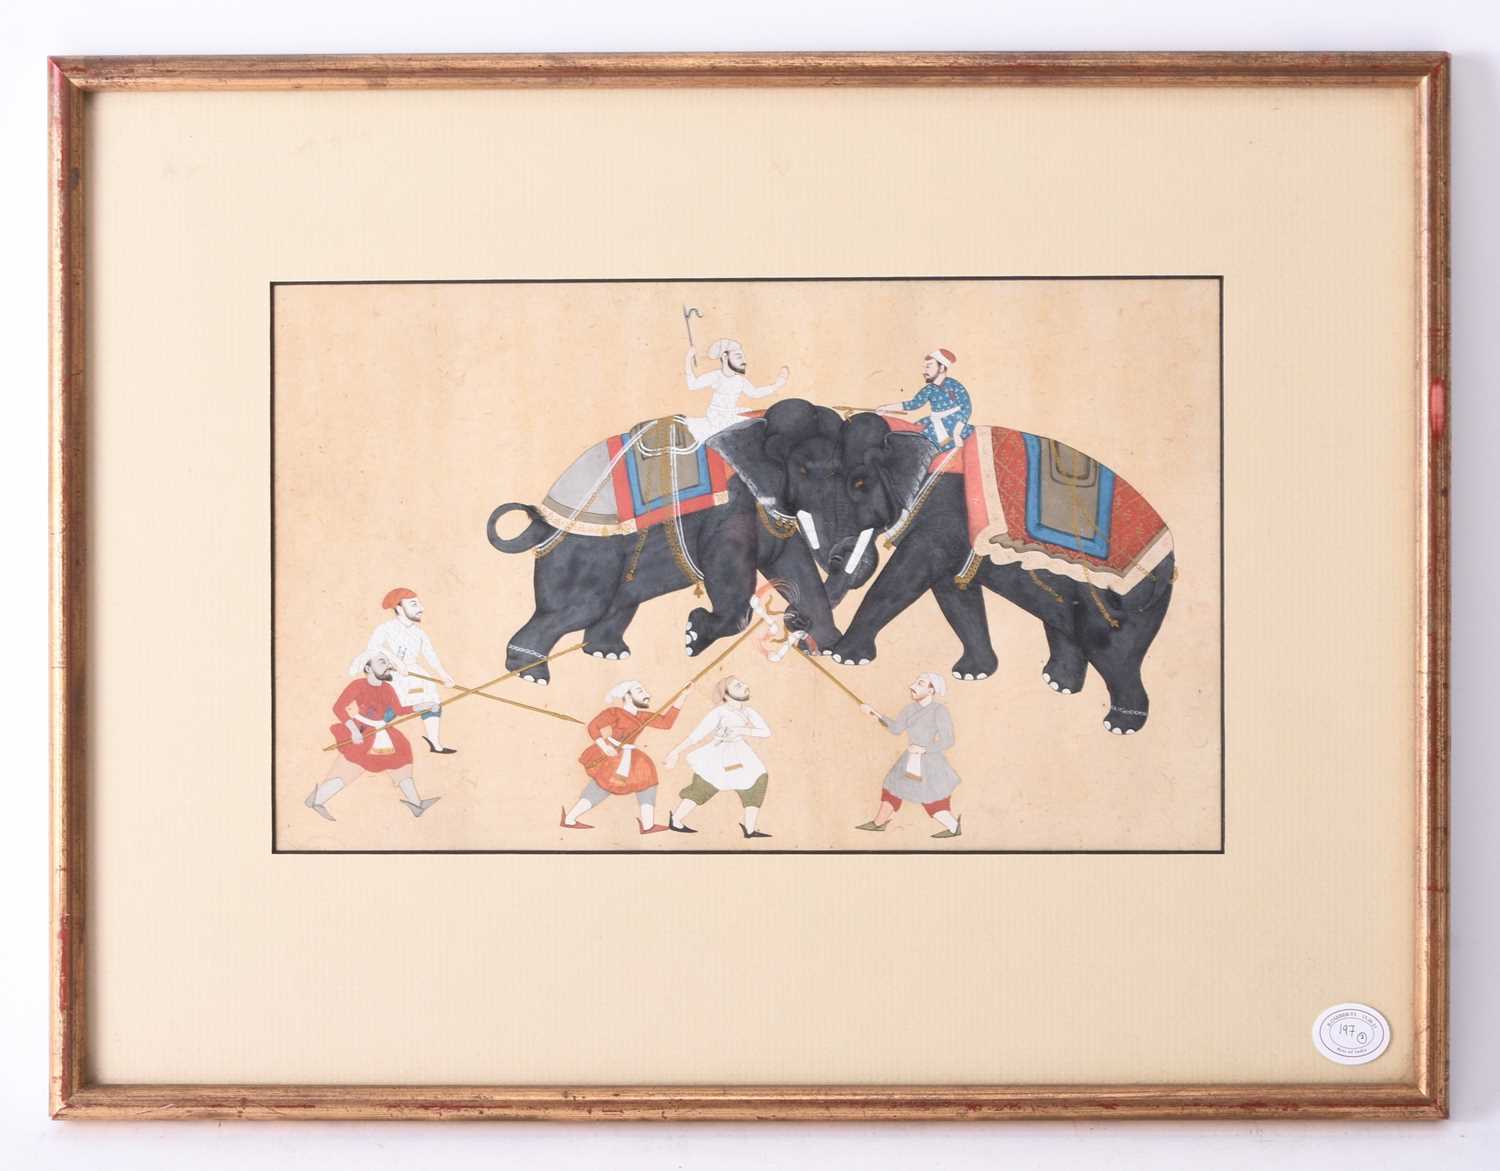 An Indian miniature painting of elephant fighting